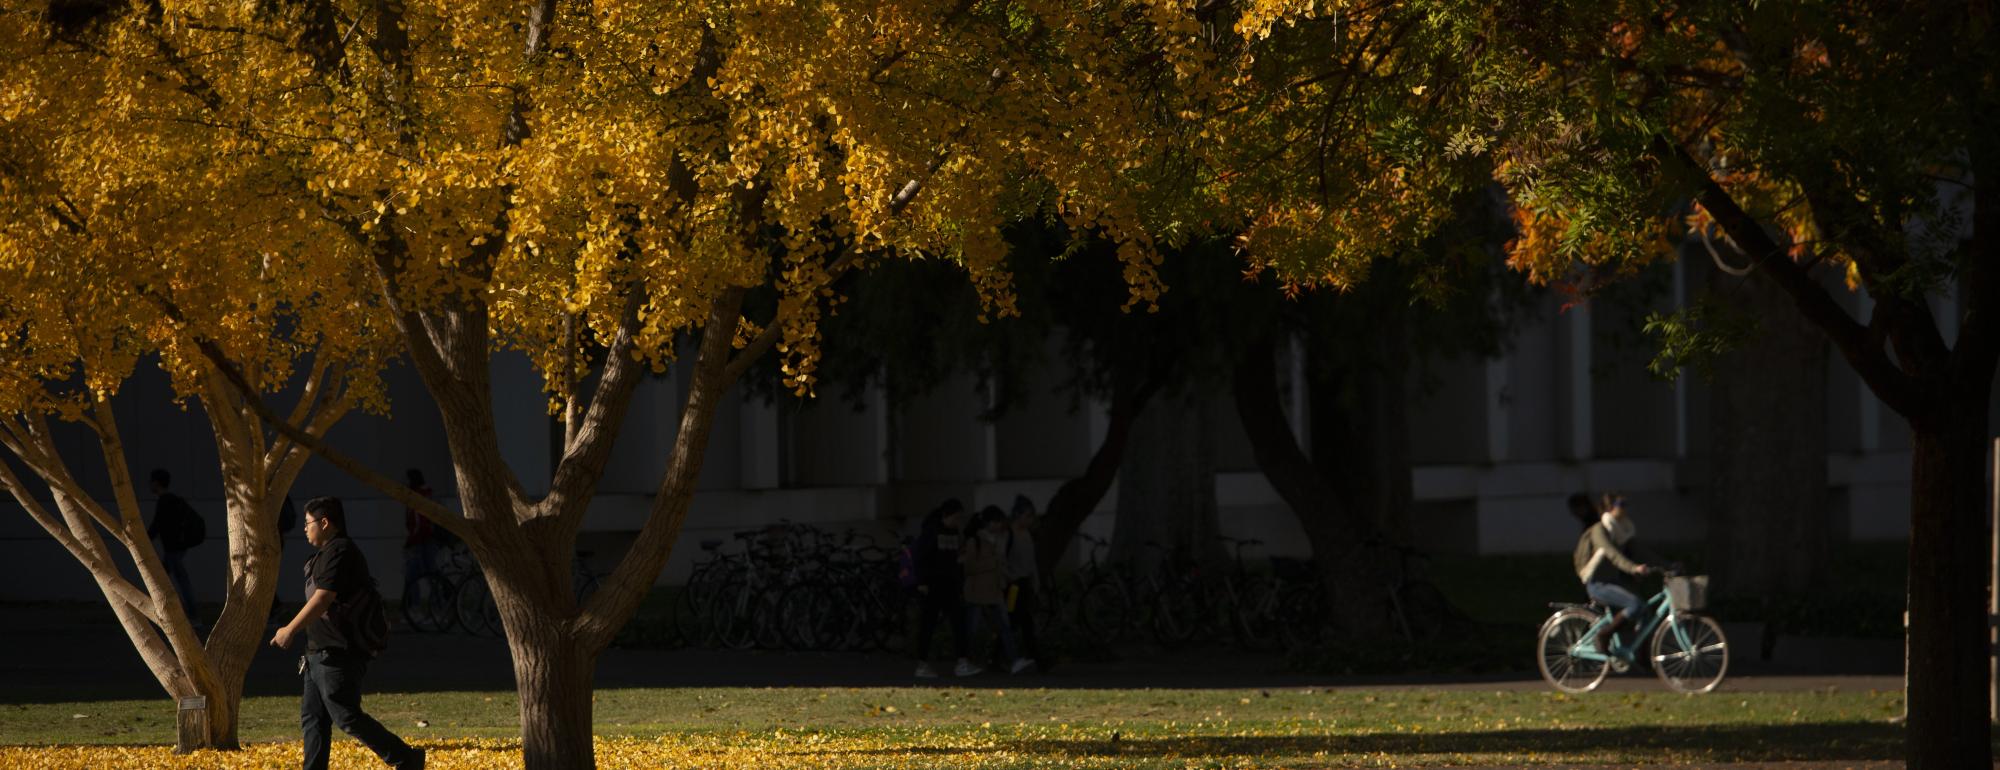 Campus scene with bicyclist and individual walking under fall foliage